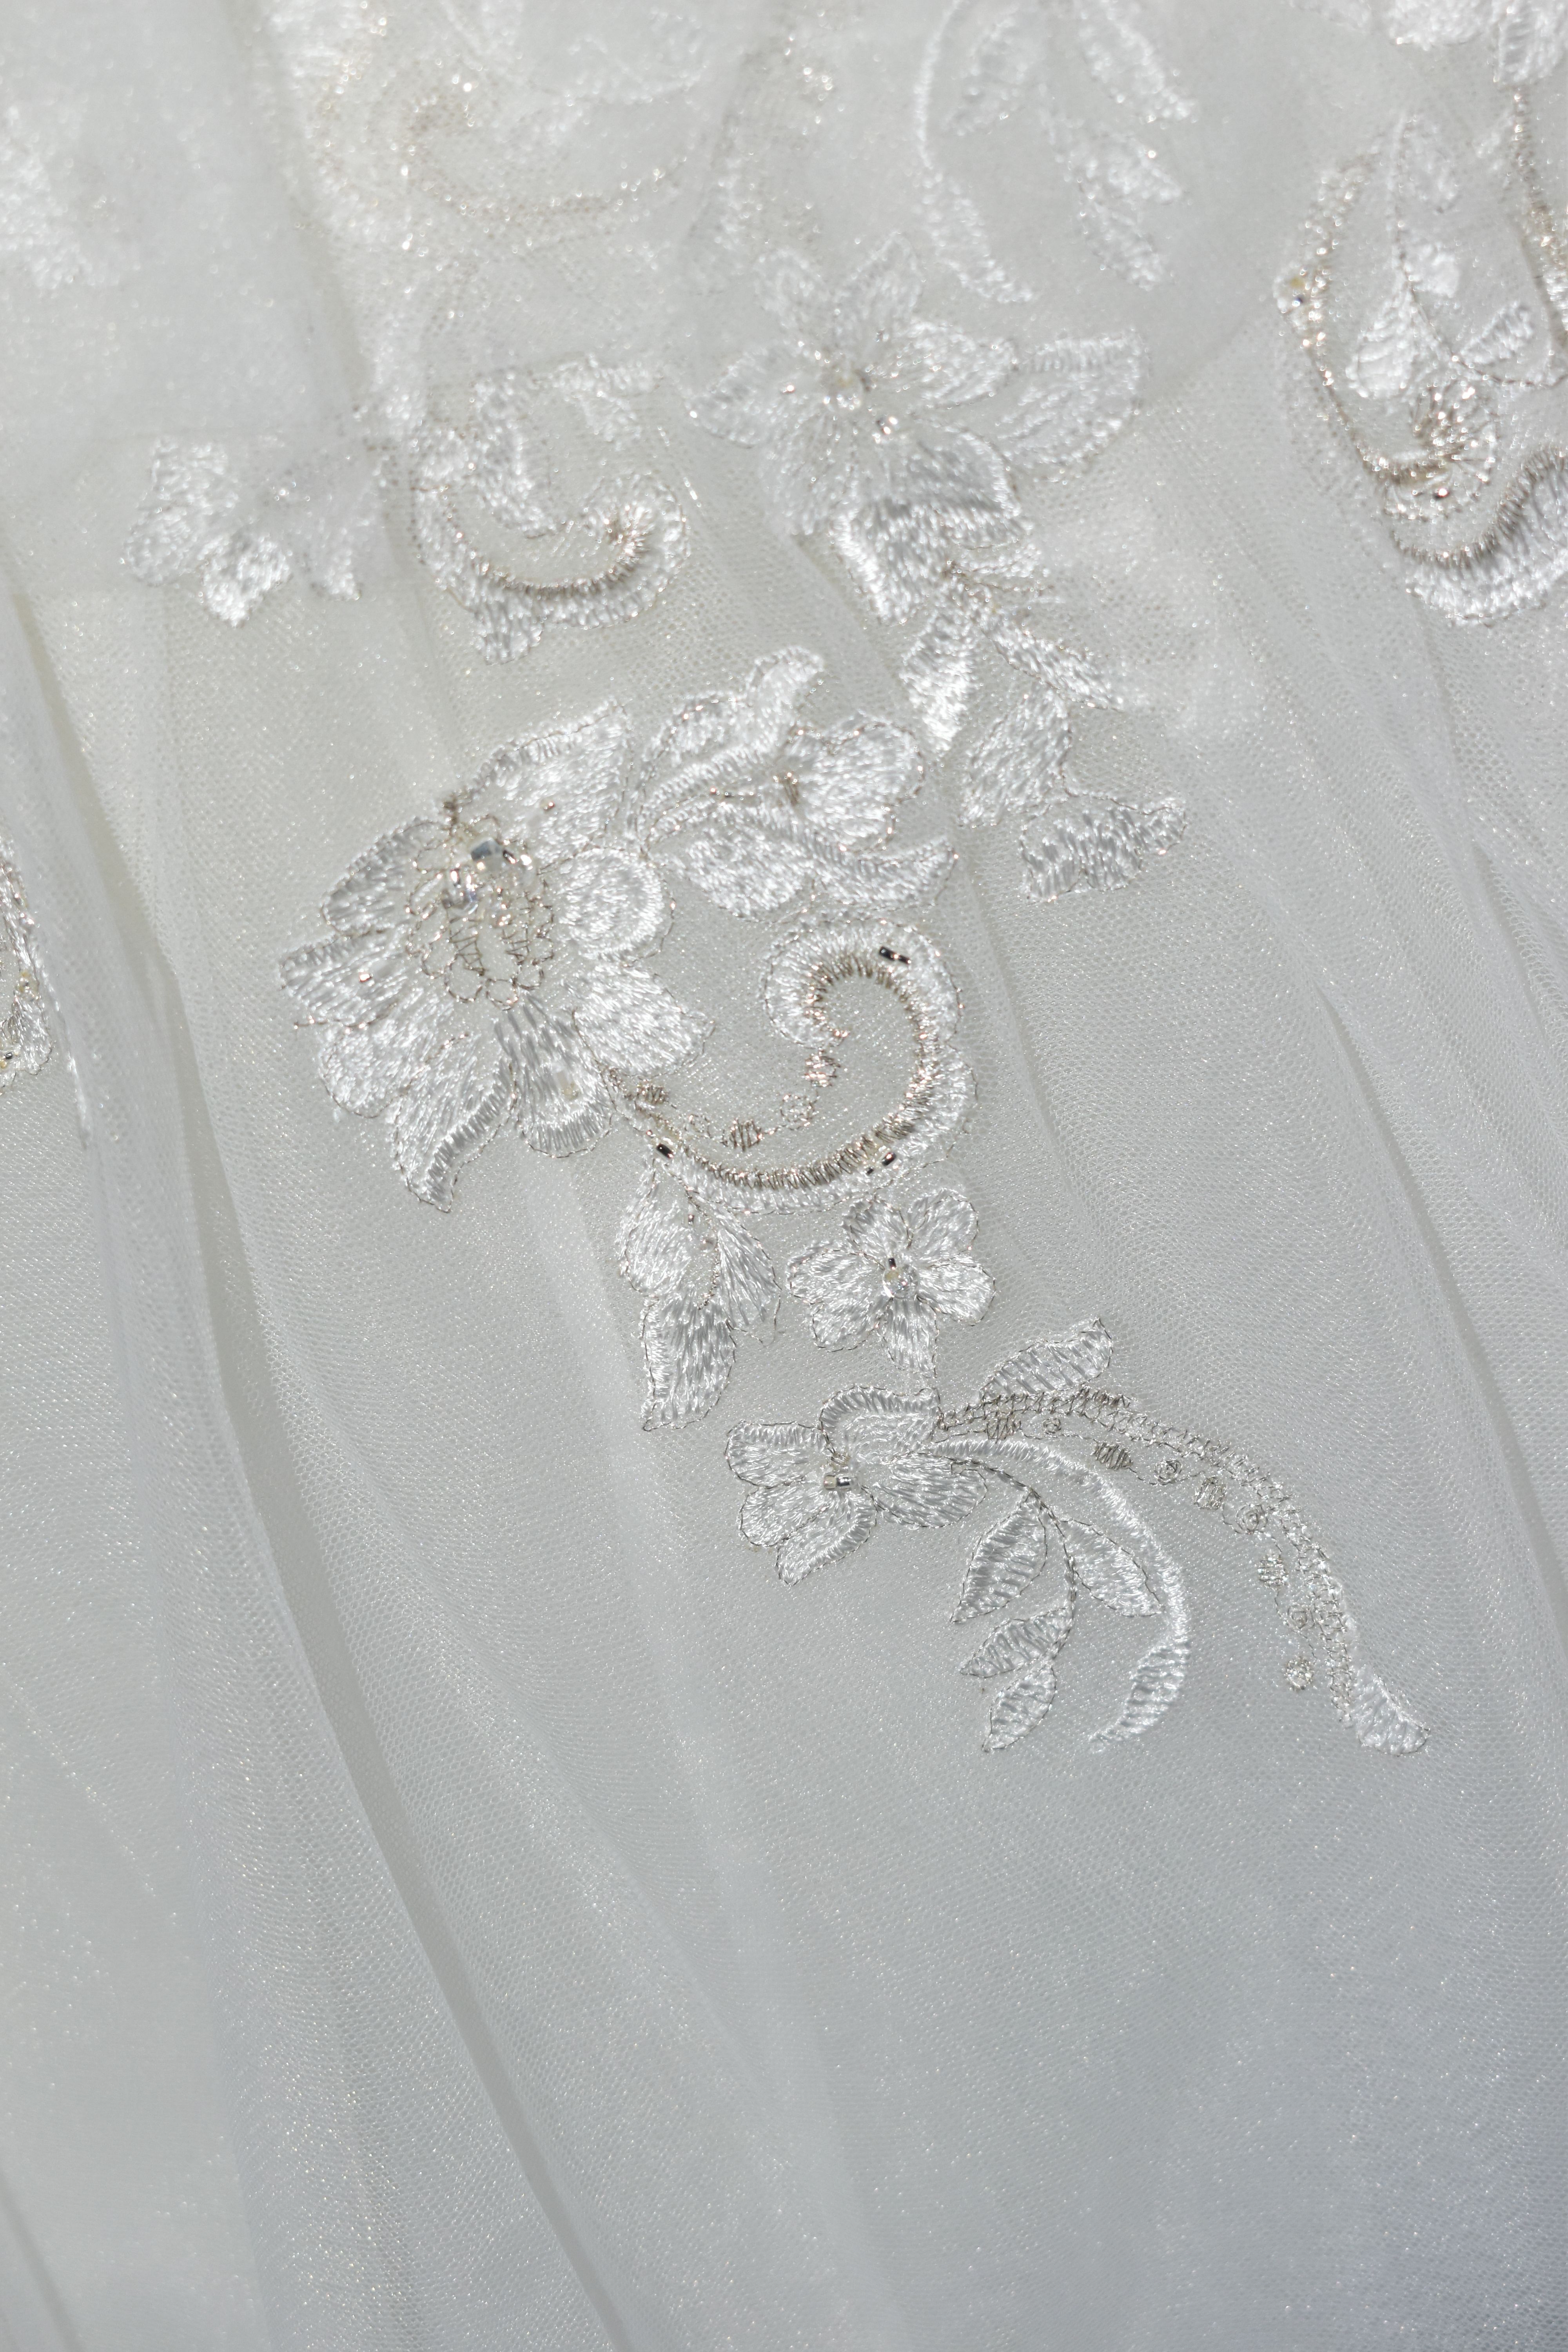 WEDDING DRESS, 'Sophia Tolli', ivory, size 6, beaded appliques, button detail along back, dropped - Image 7 of 16